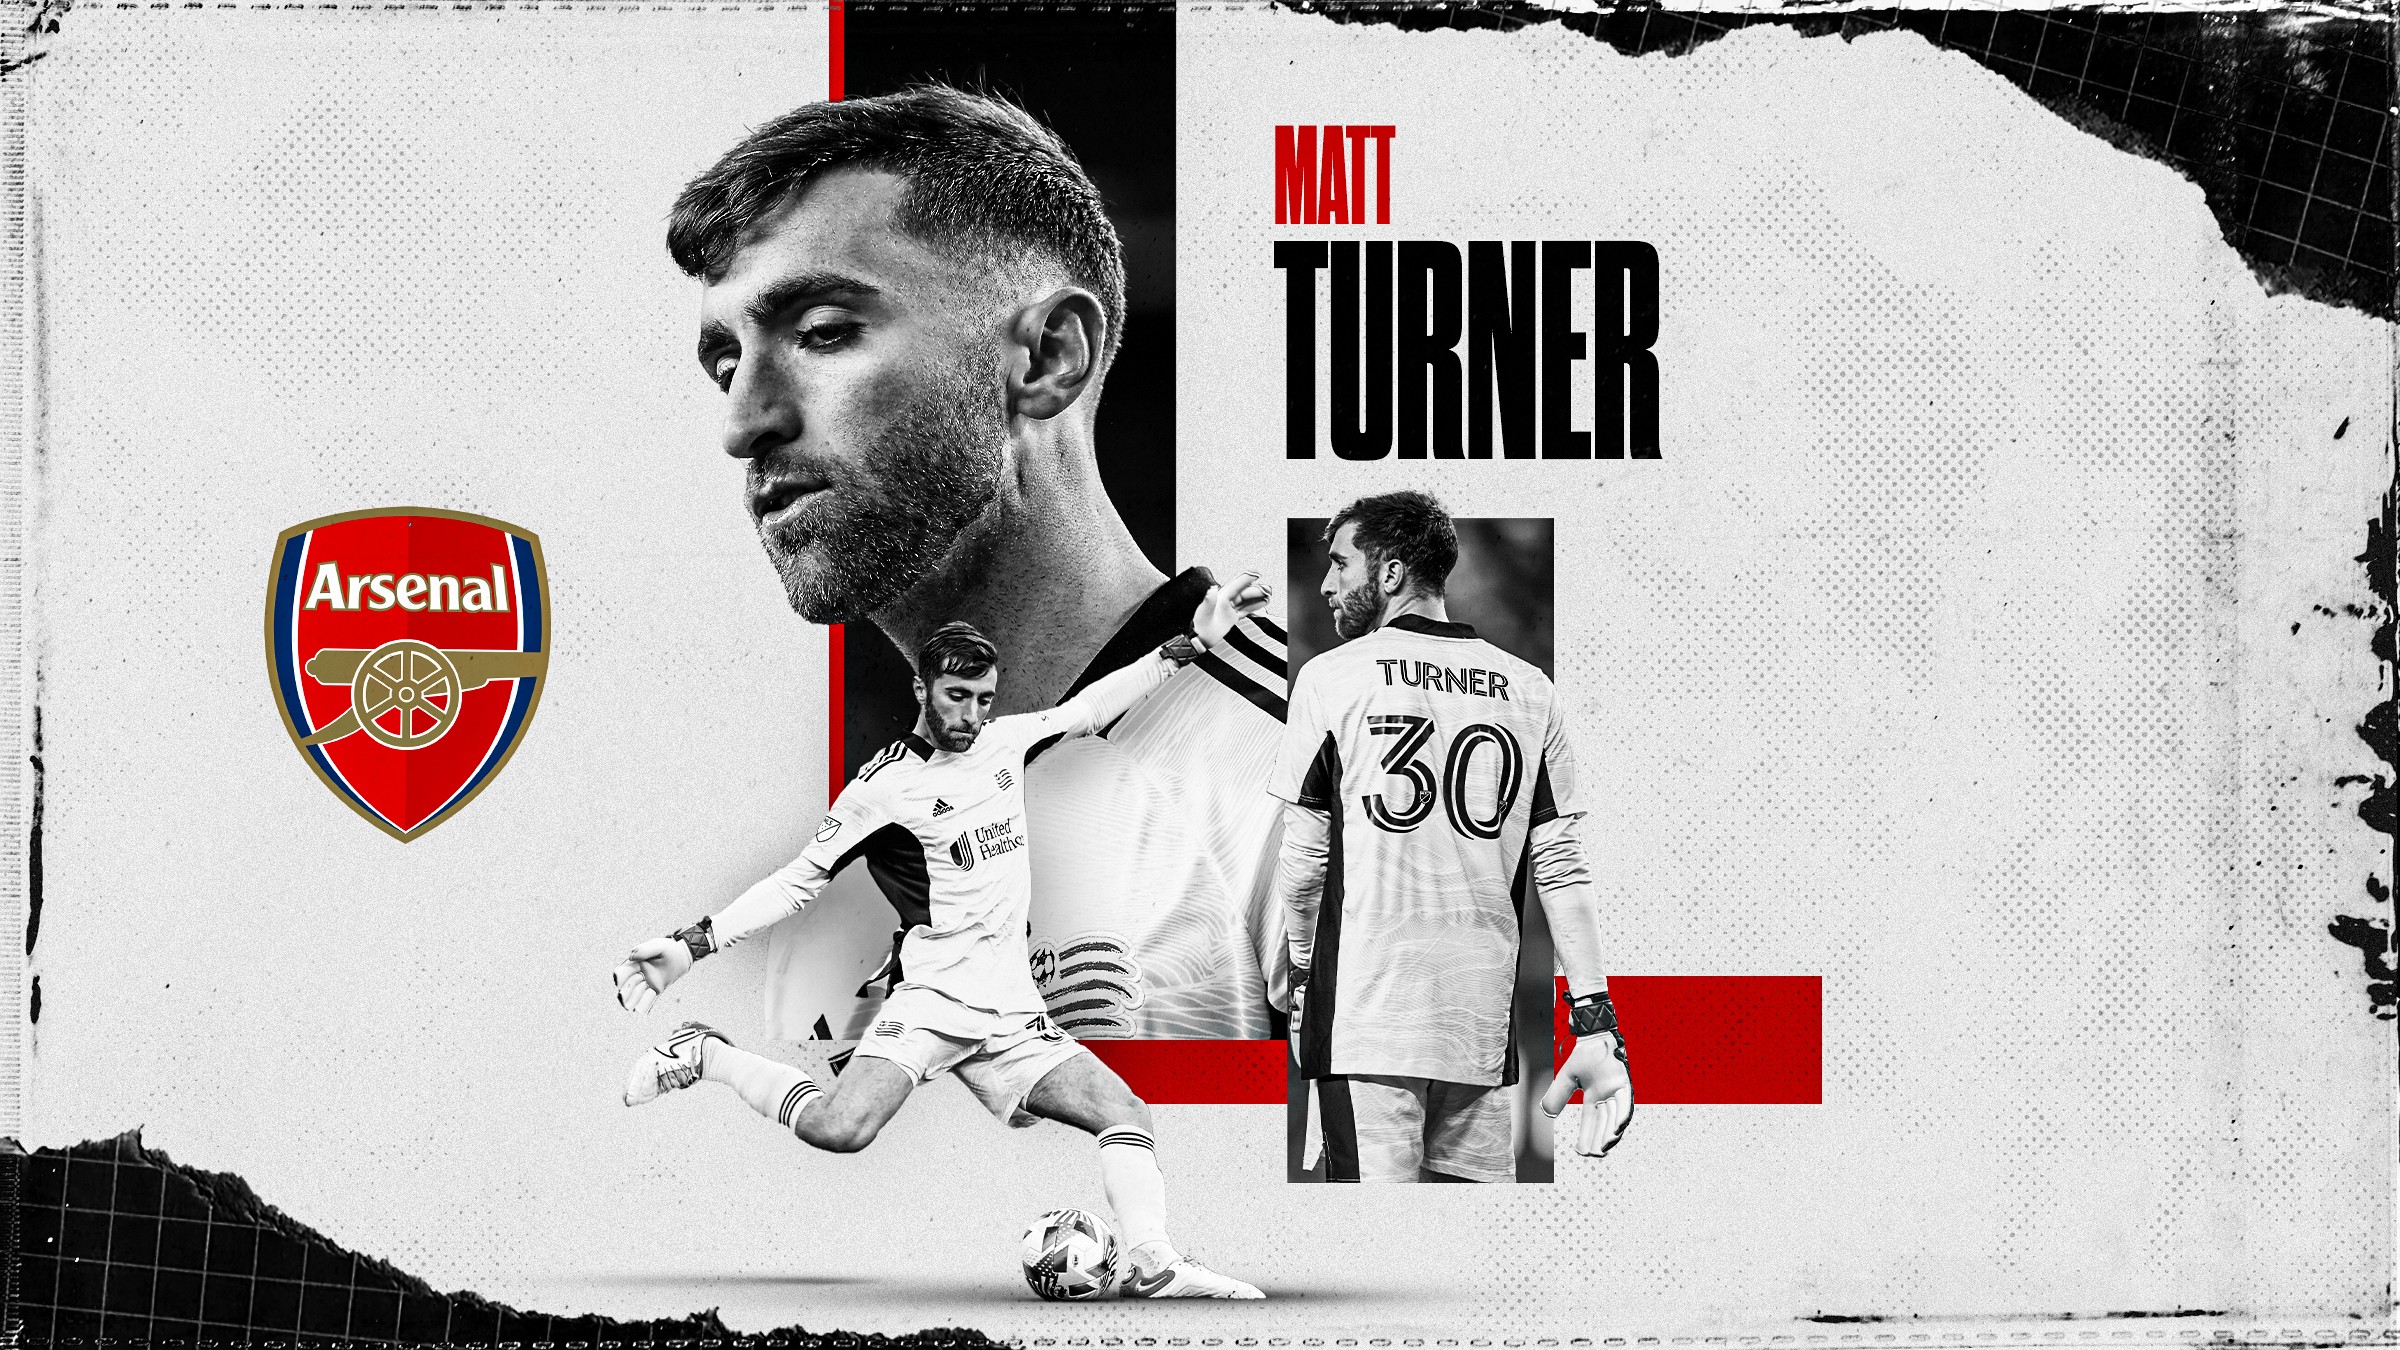 Matt Turner ticketed for Premier League after unlikely rise to stardom